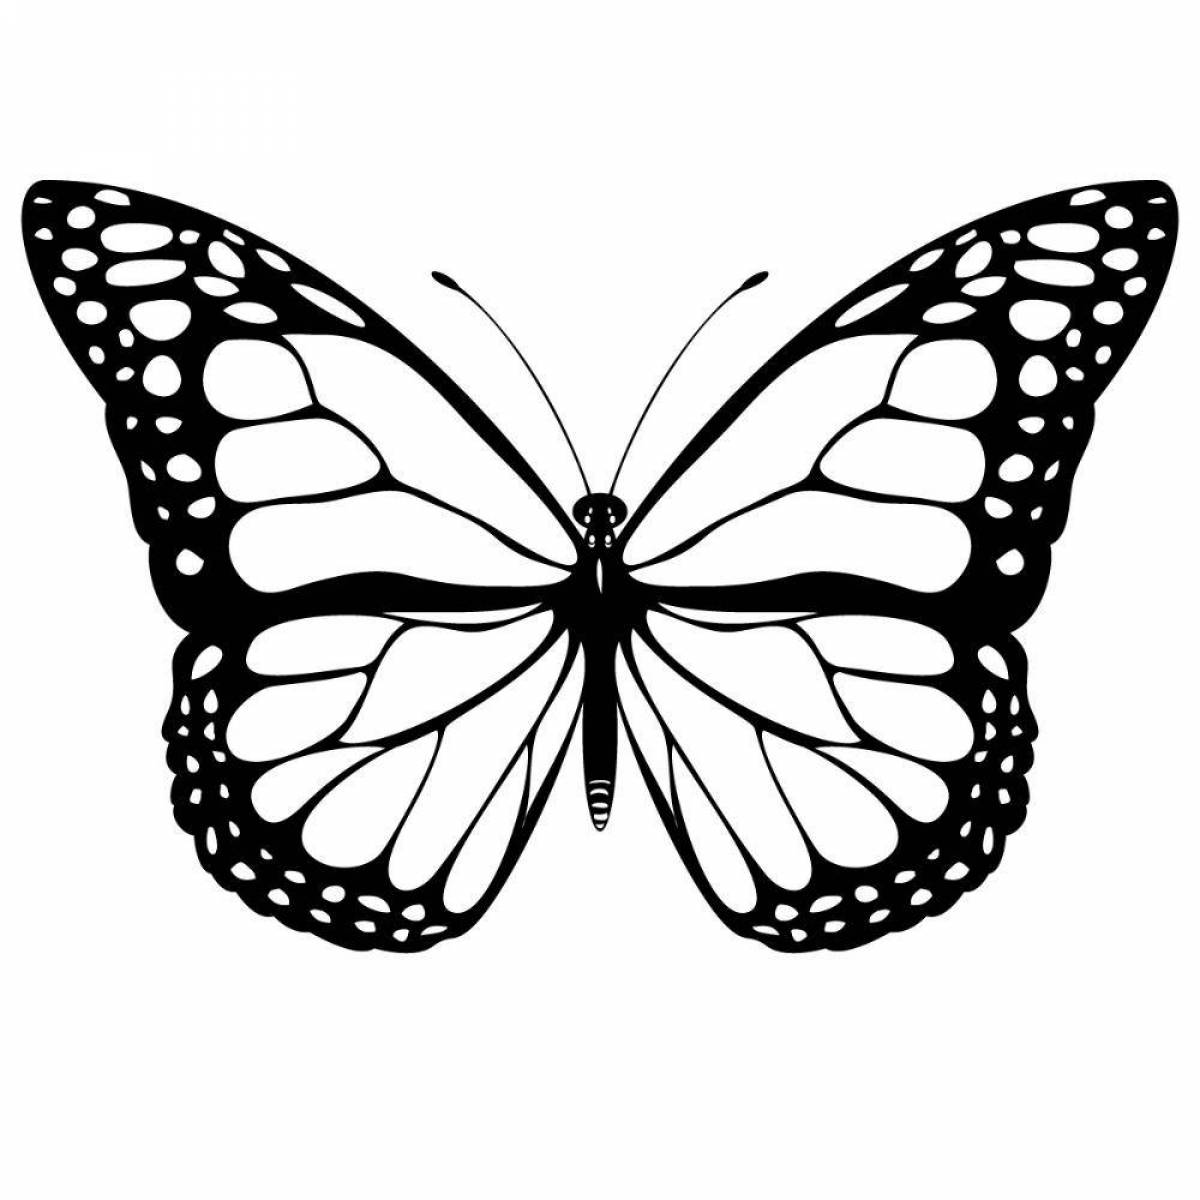 Amazing Butterfly Coloring Page